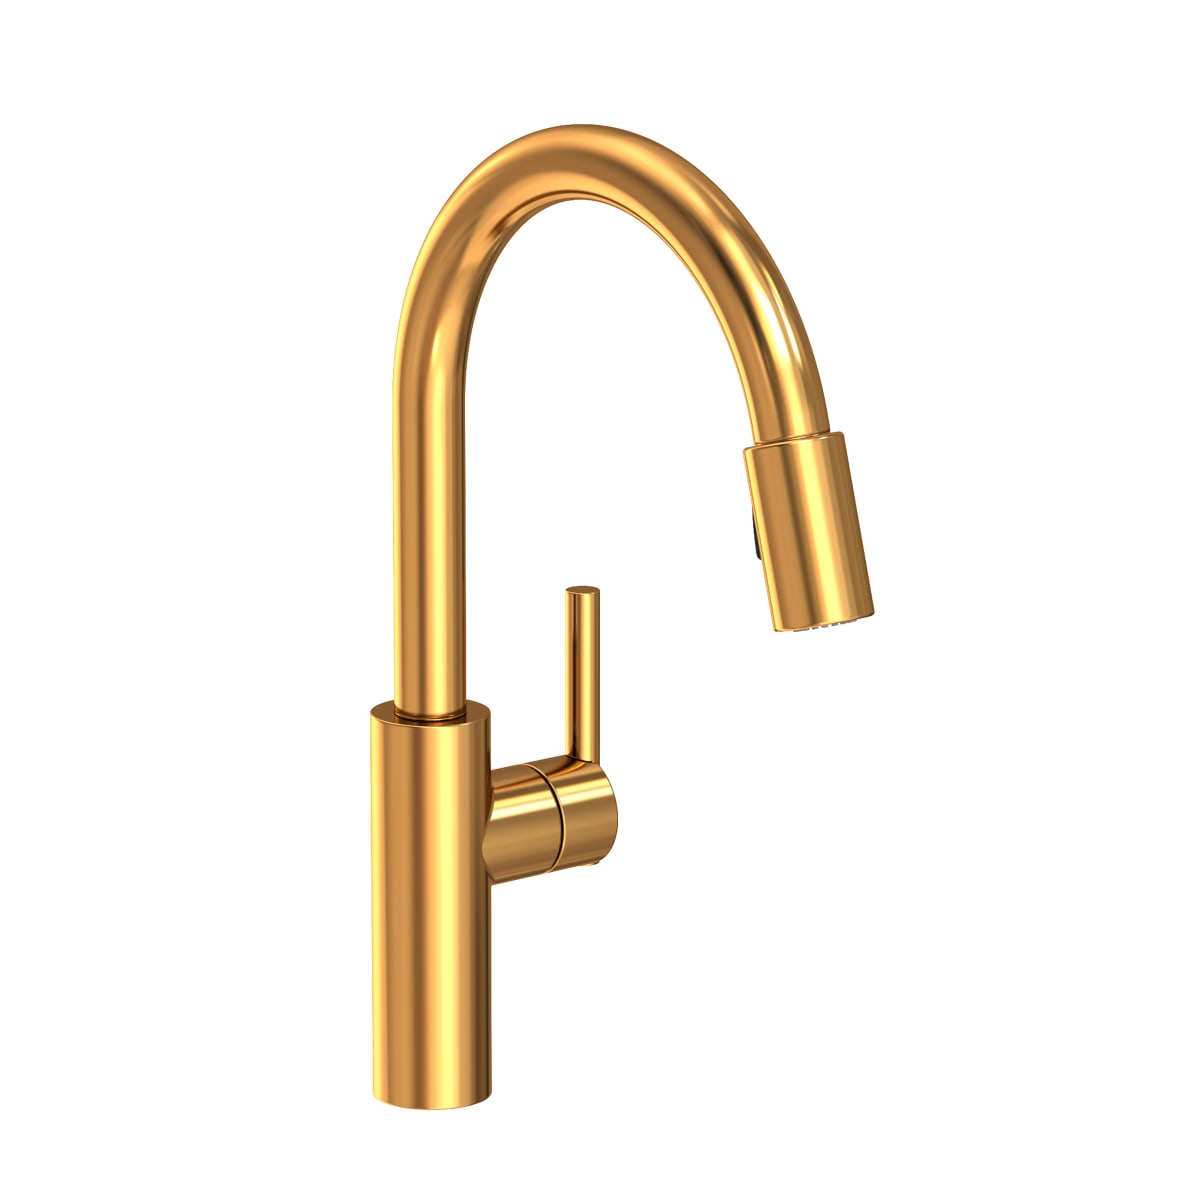 Newport Brass 1500-5123/10 at Chariot Plumbing Supply and Design The best  selection of decorative plumbing products in Salt Lake City, UT -  Salt-Lake-City-Utah